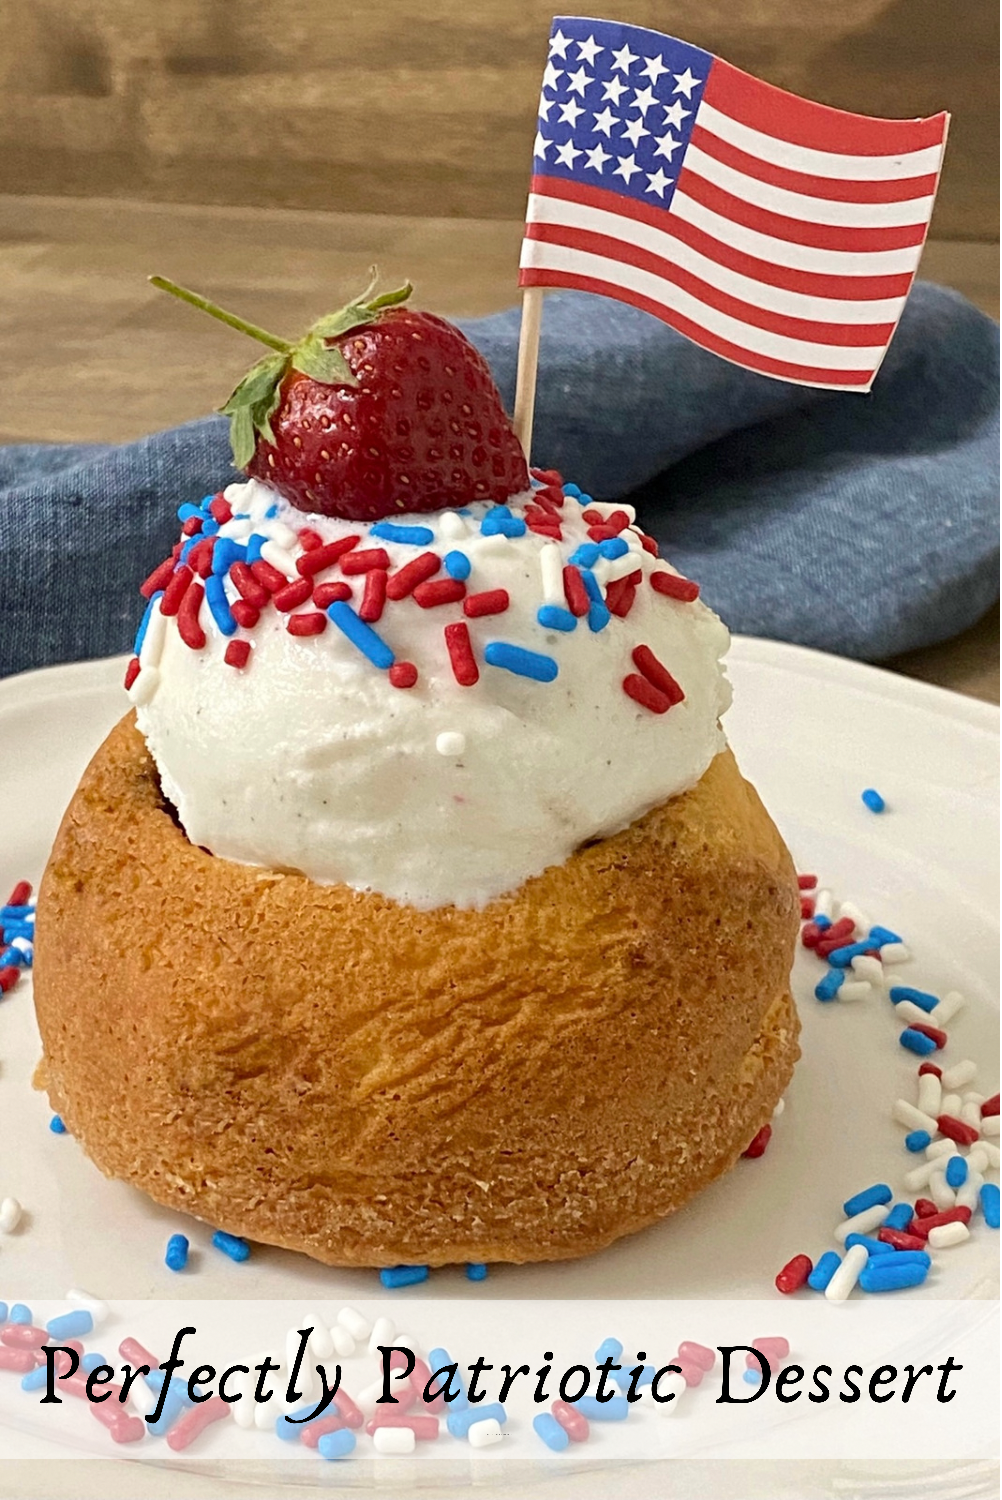 Pin for Pinterest of a vanilla cake bowl with vanilla ice cream inside decorated with red, white, and blue sprinkles and a strawberry on top.